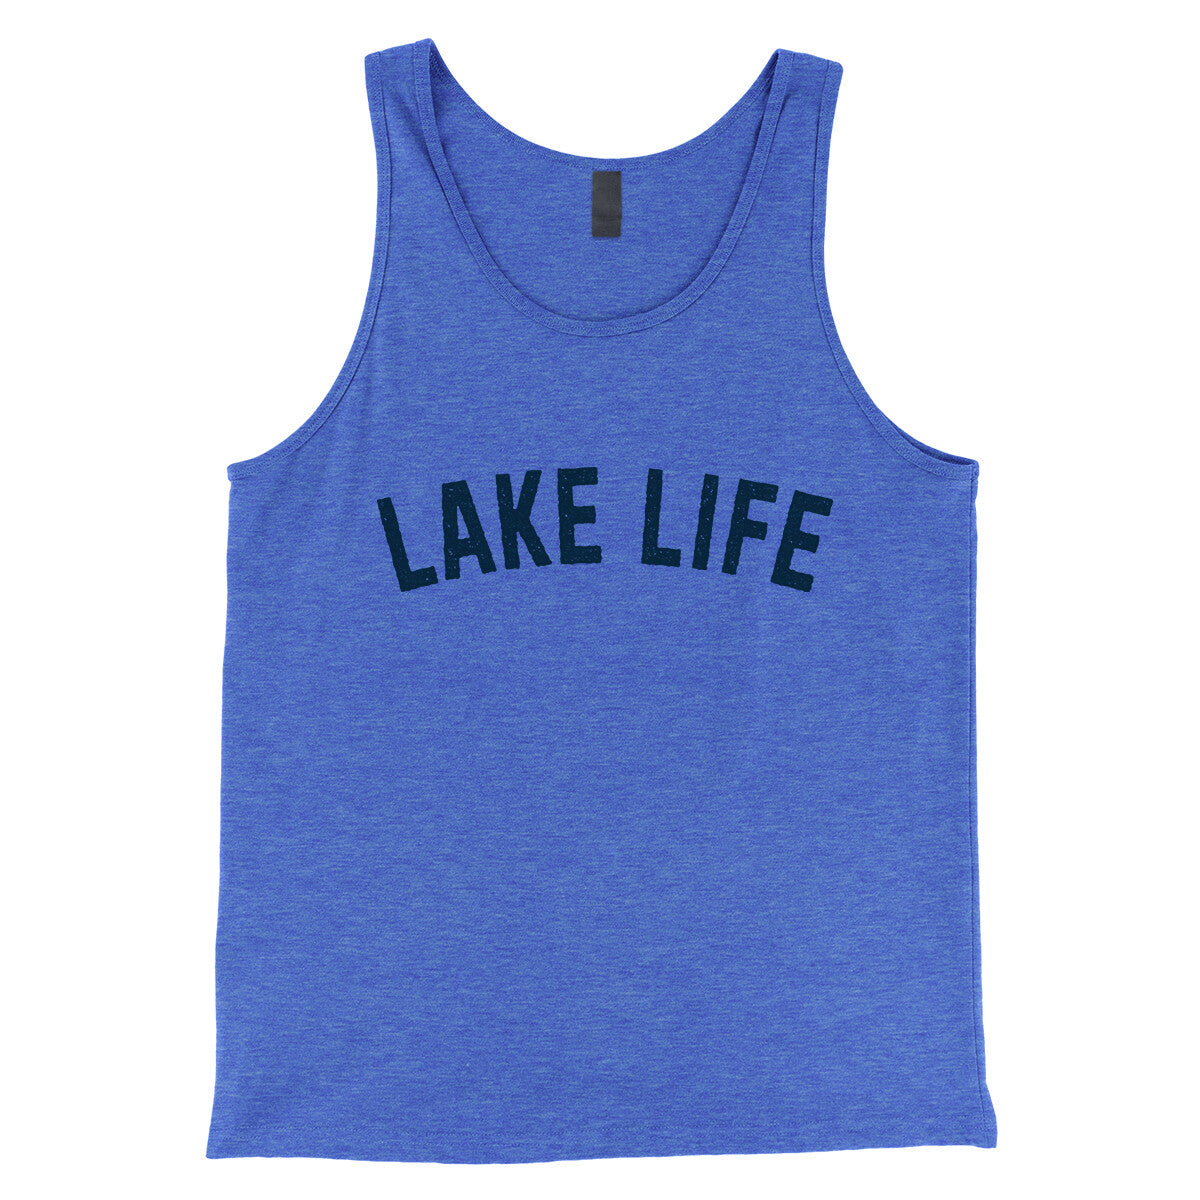 Lake Life in True Royal TriBlend Color